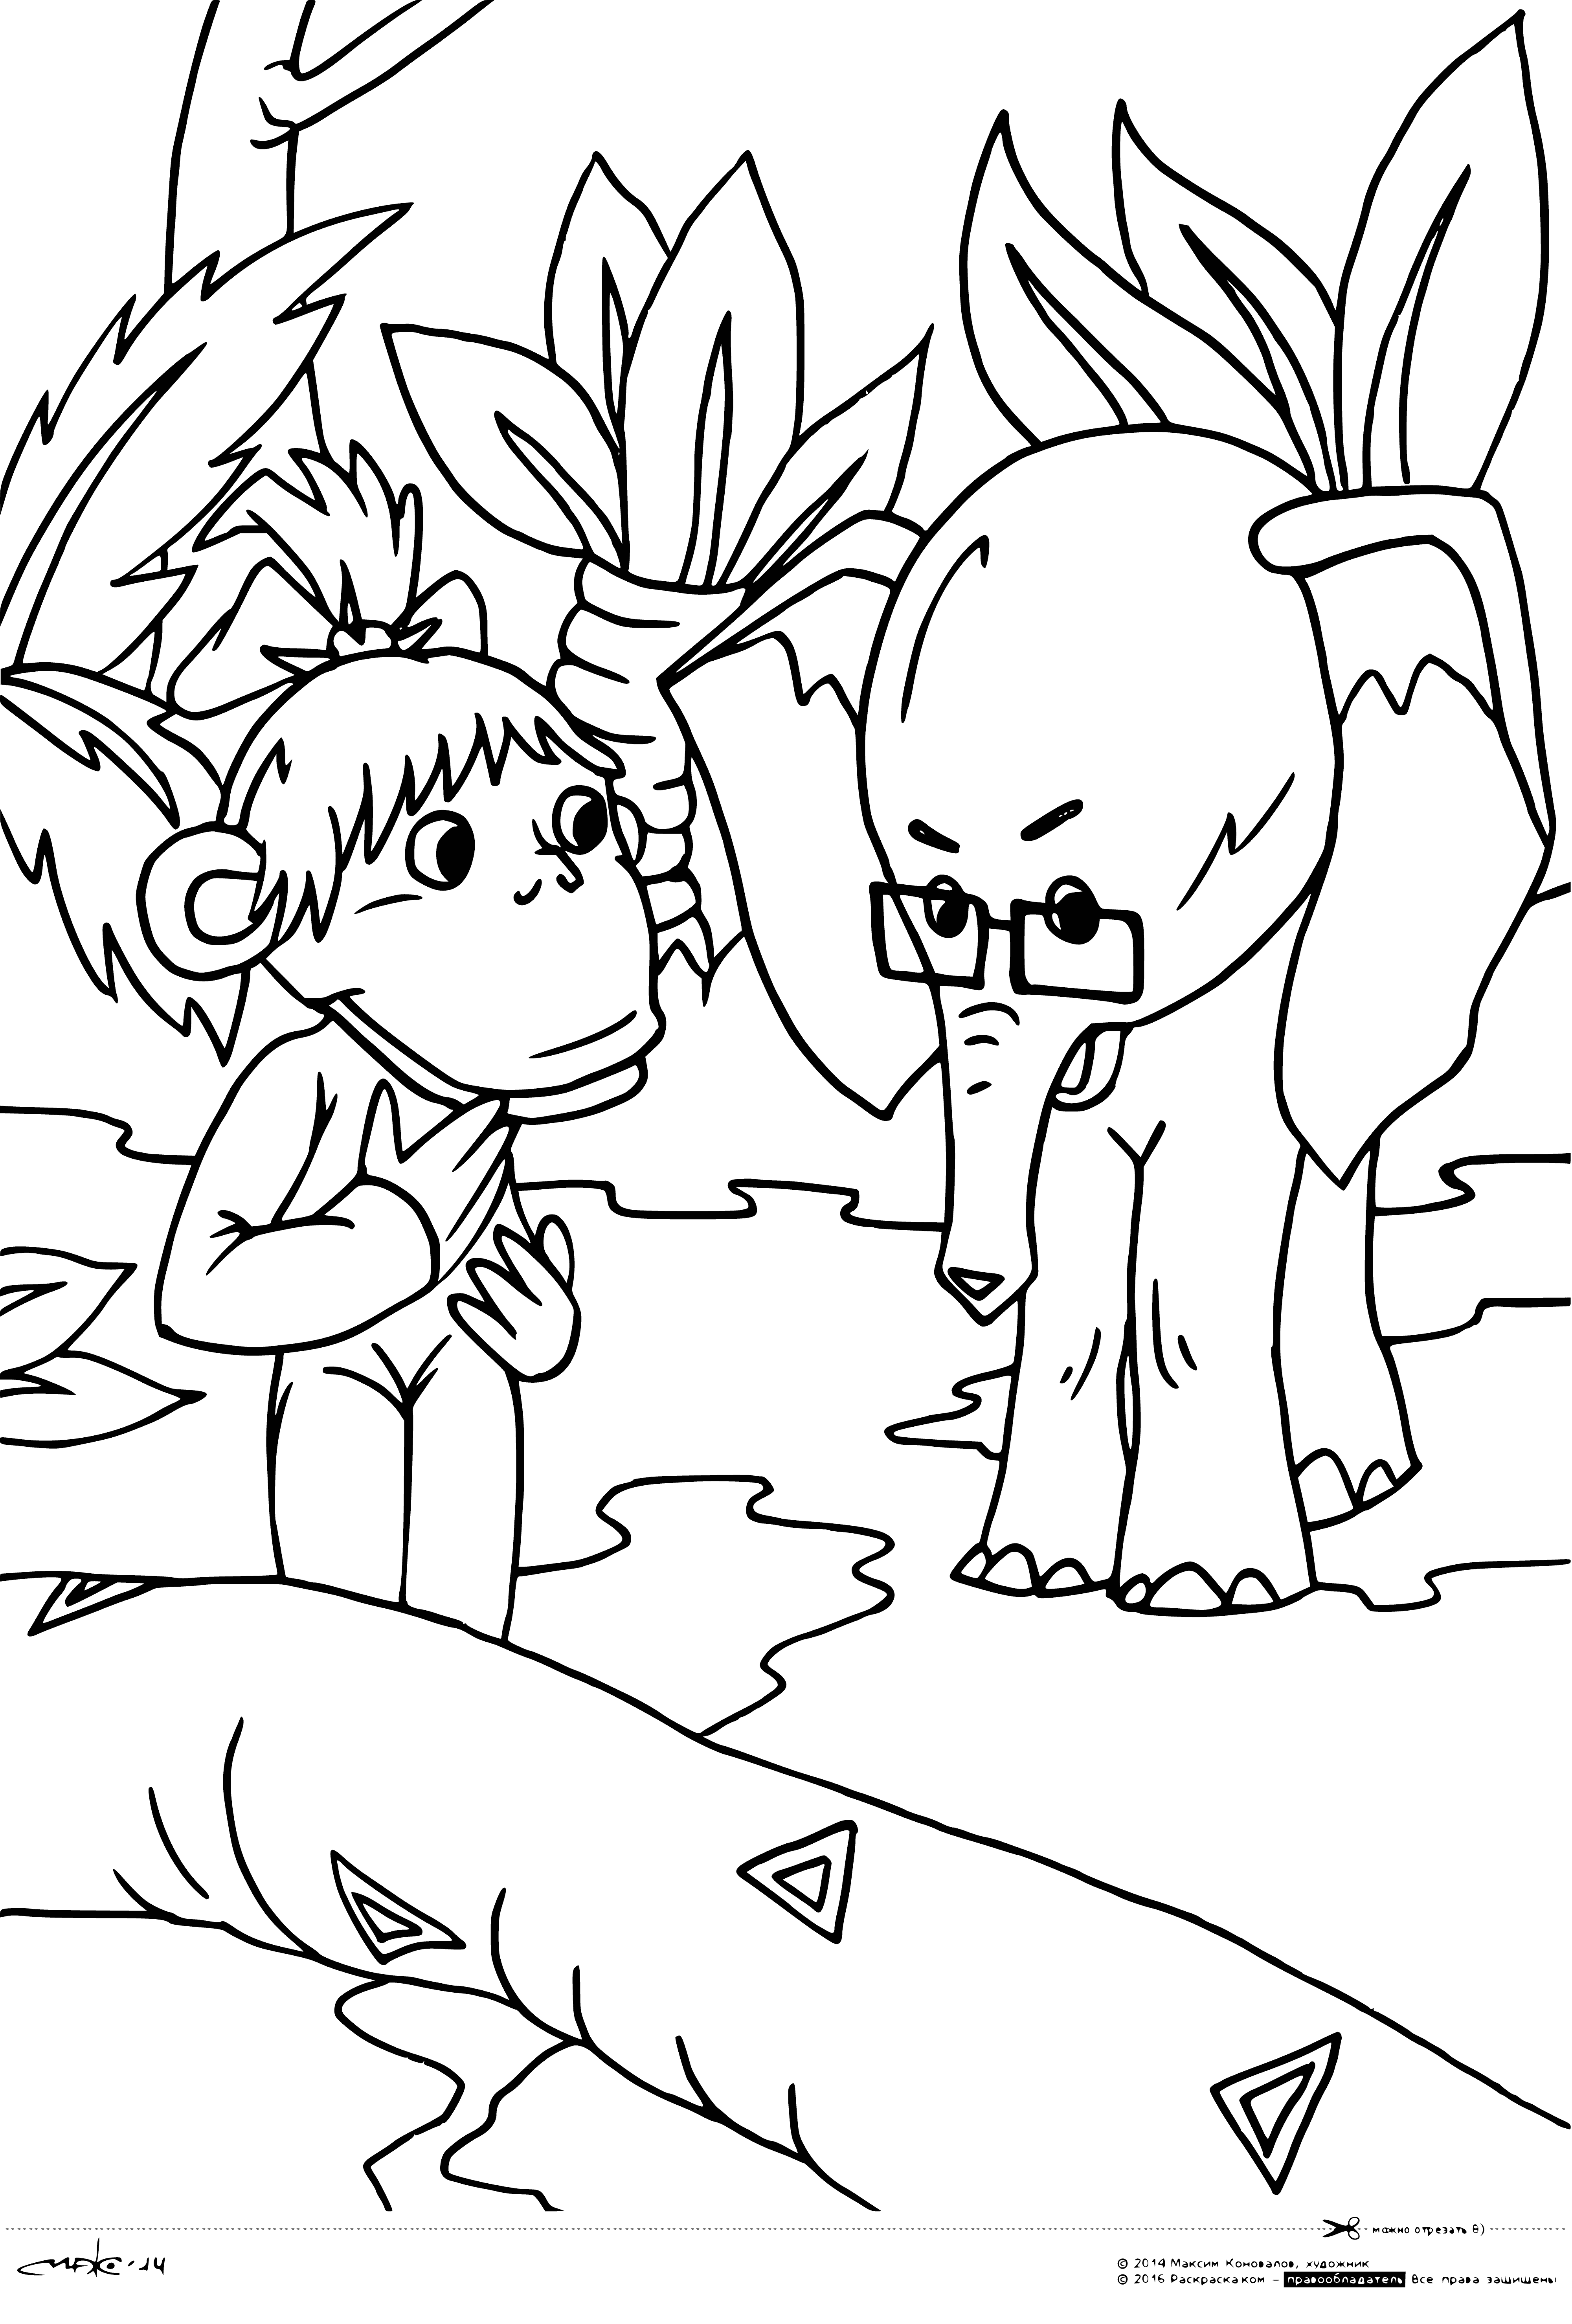 coloring page: 38 parrots of all colors, a monkey & baby elephant, preening & eating - this coloring page has it all! #coloringpage #animals